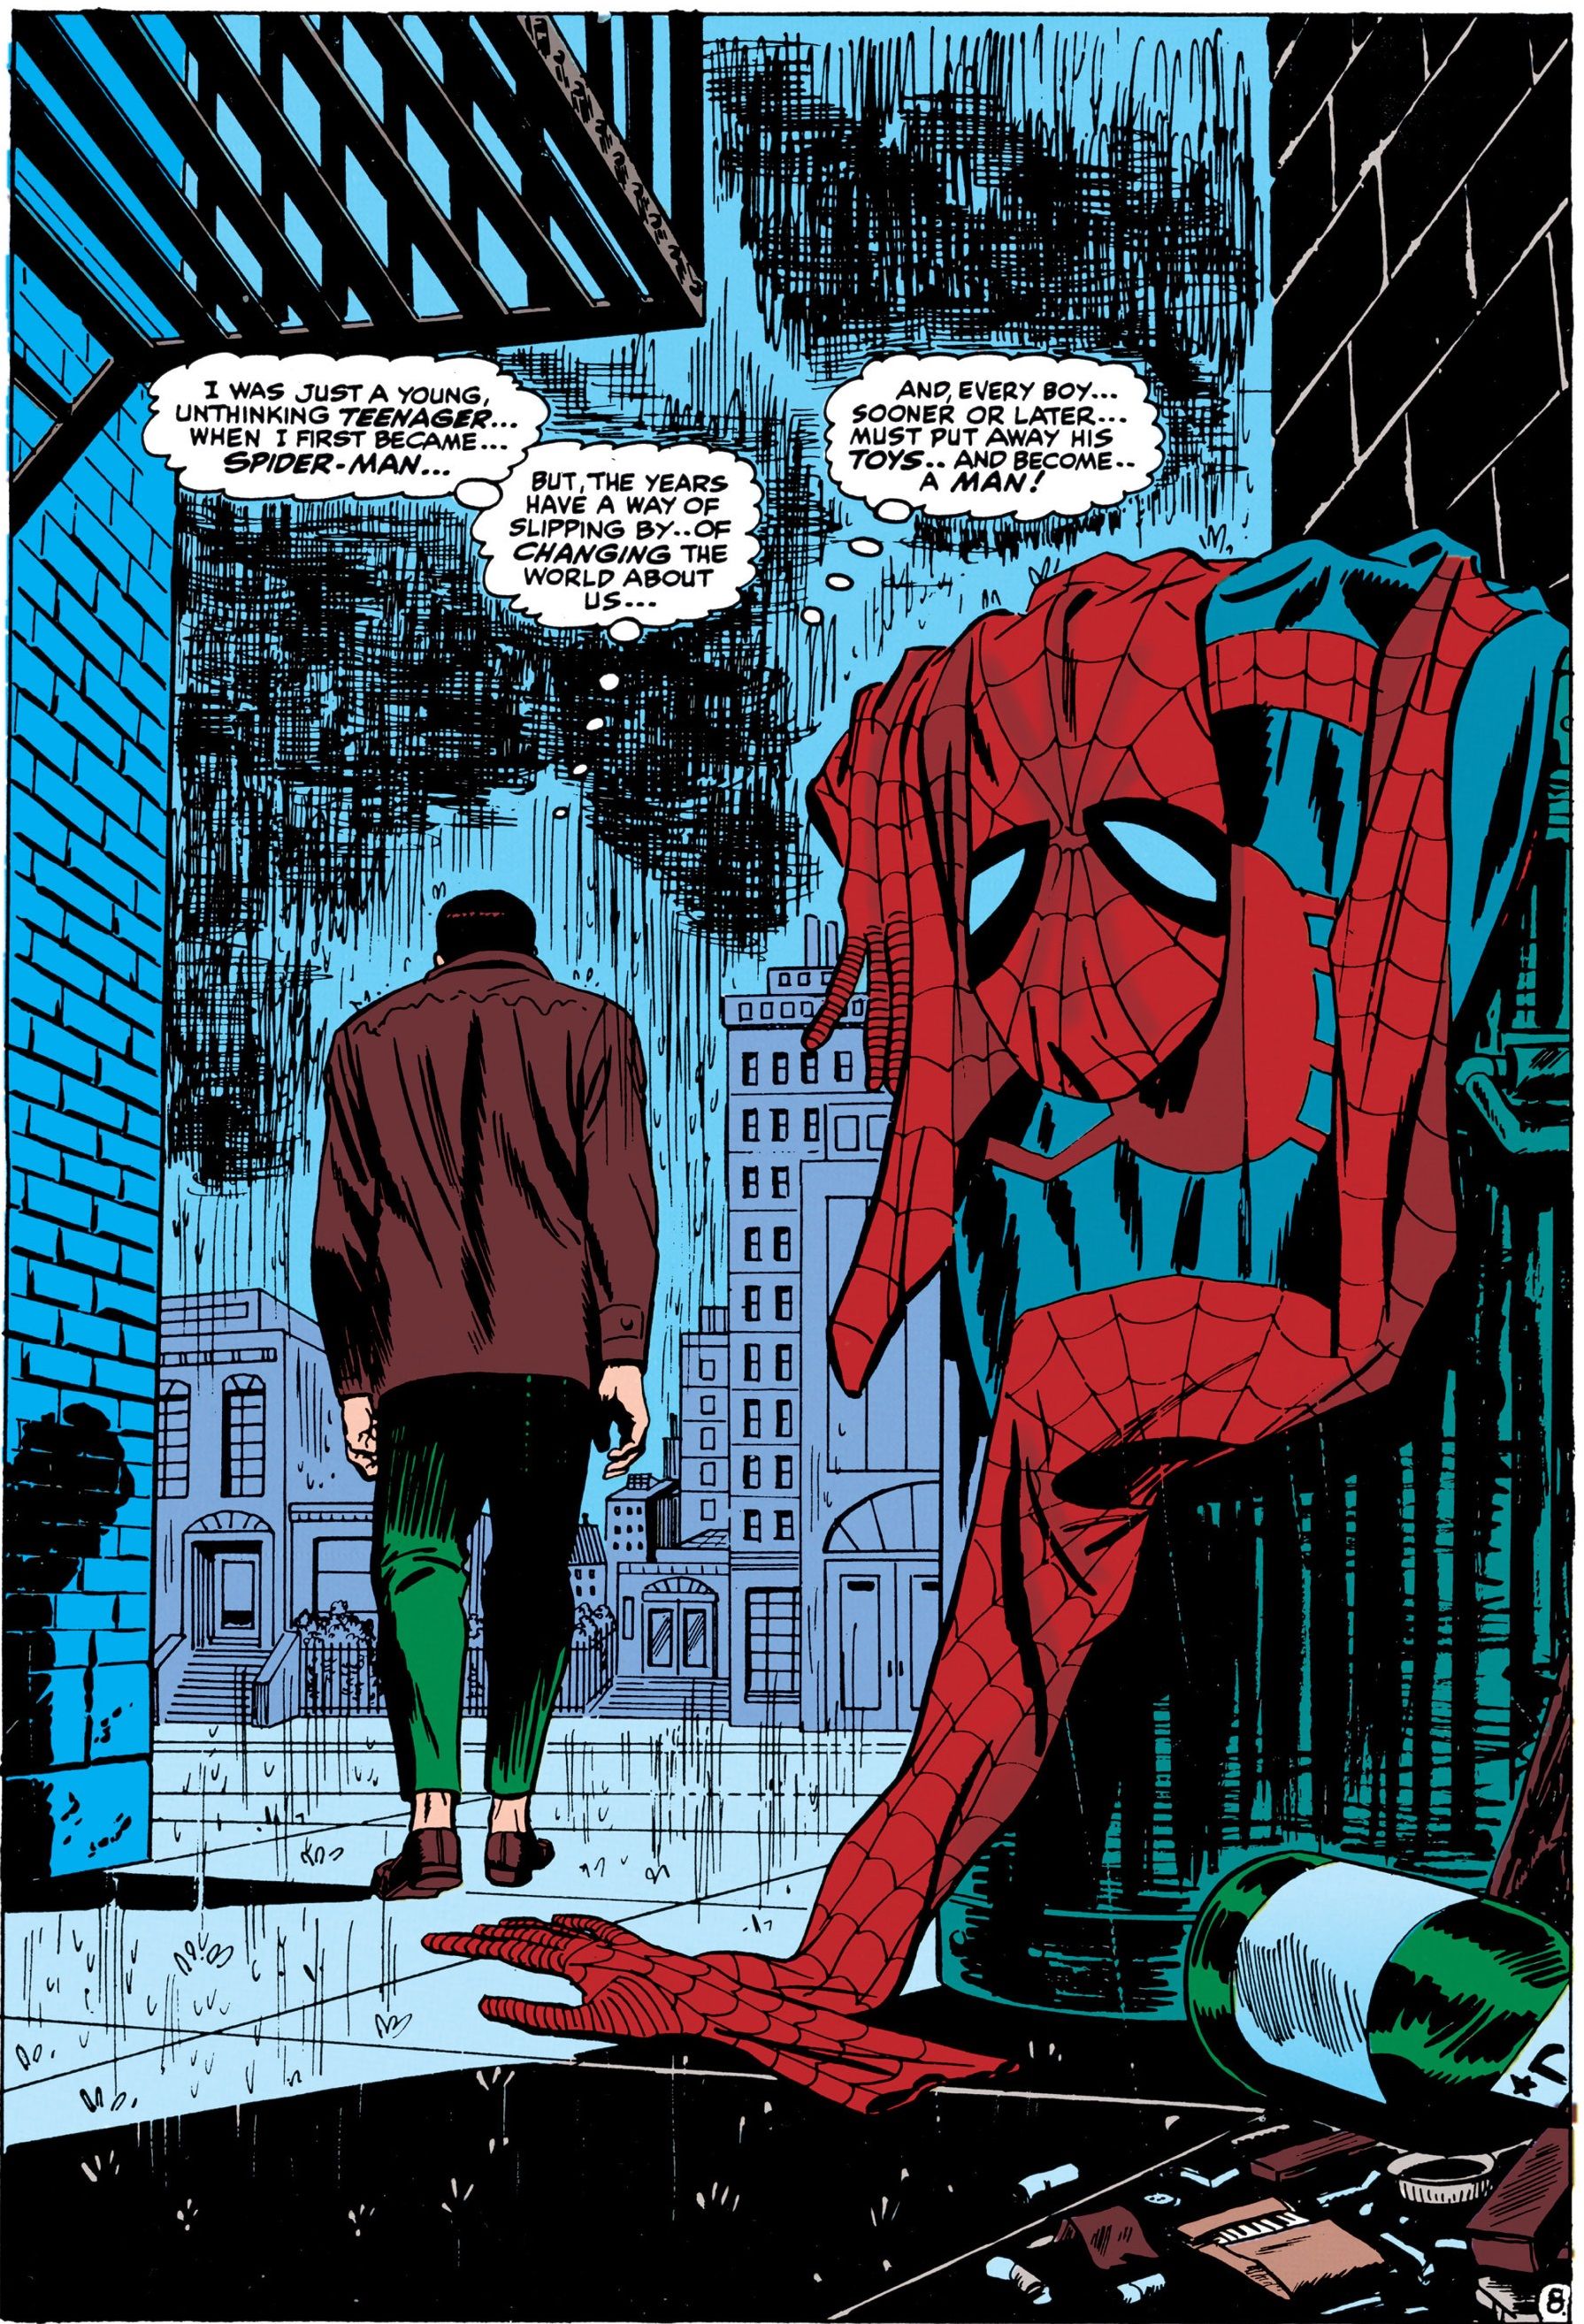 Peter quits as Spider-Man